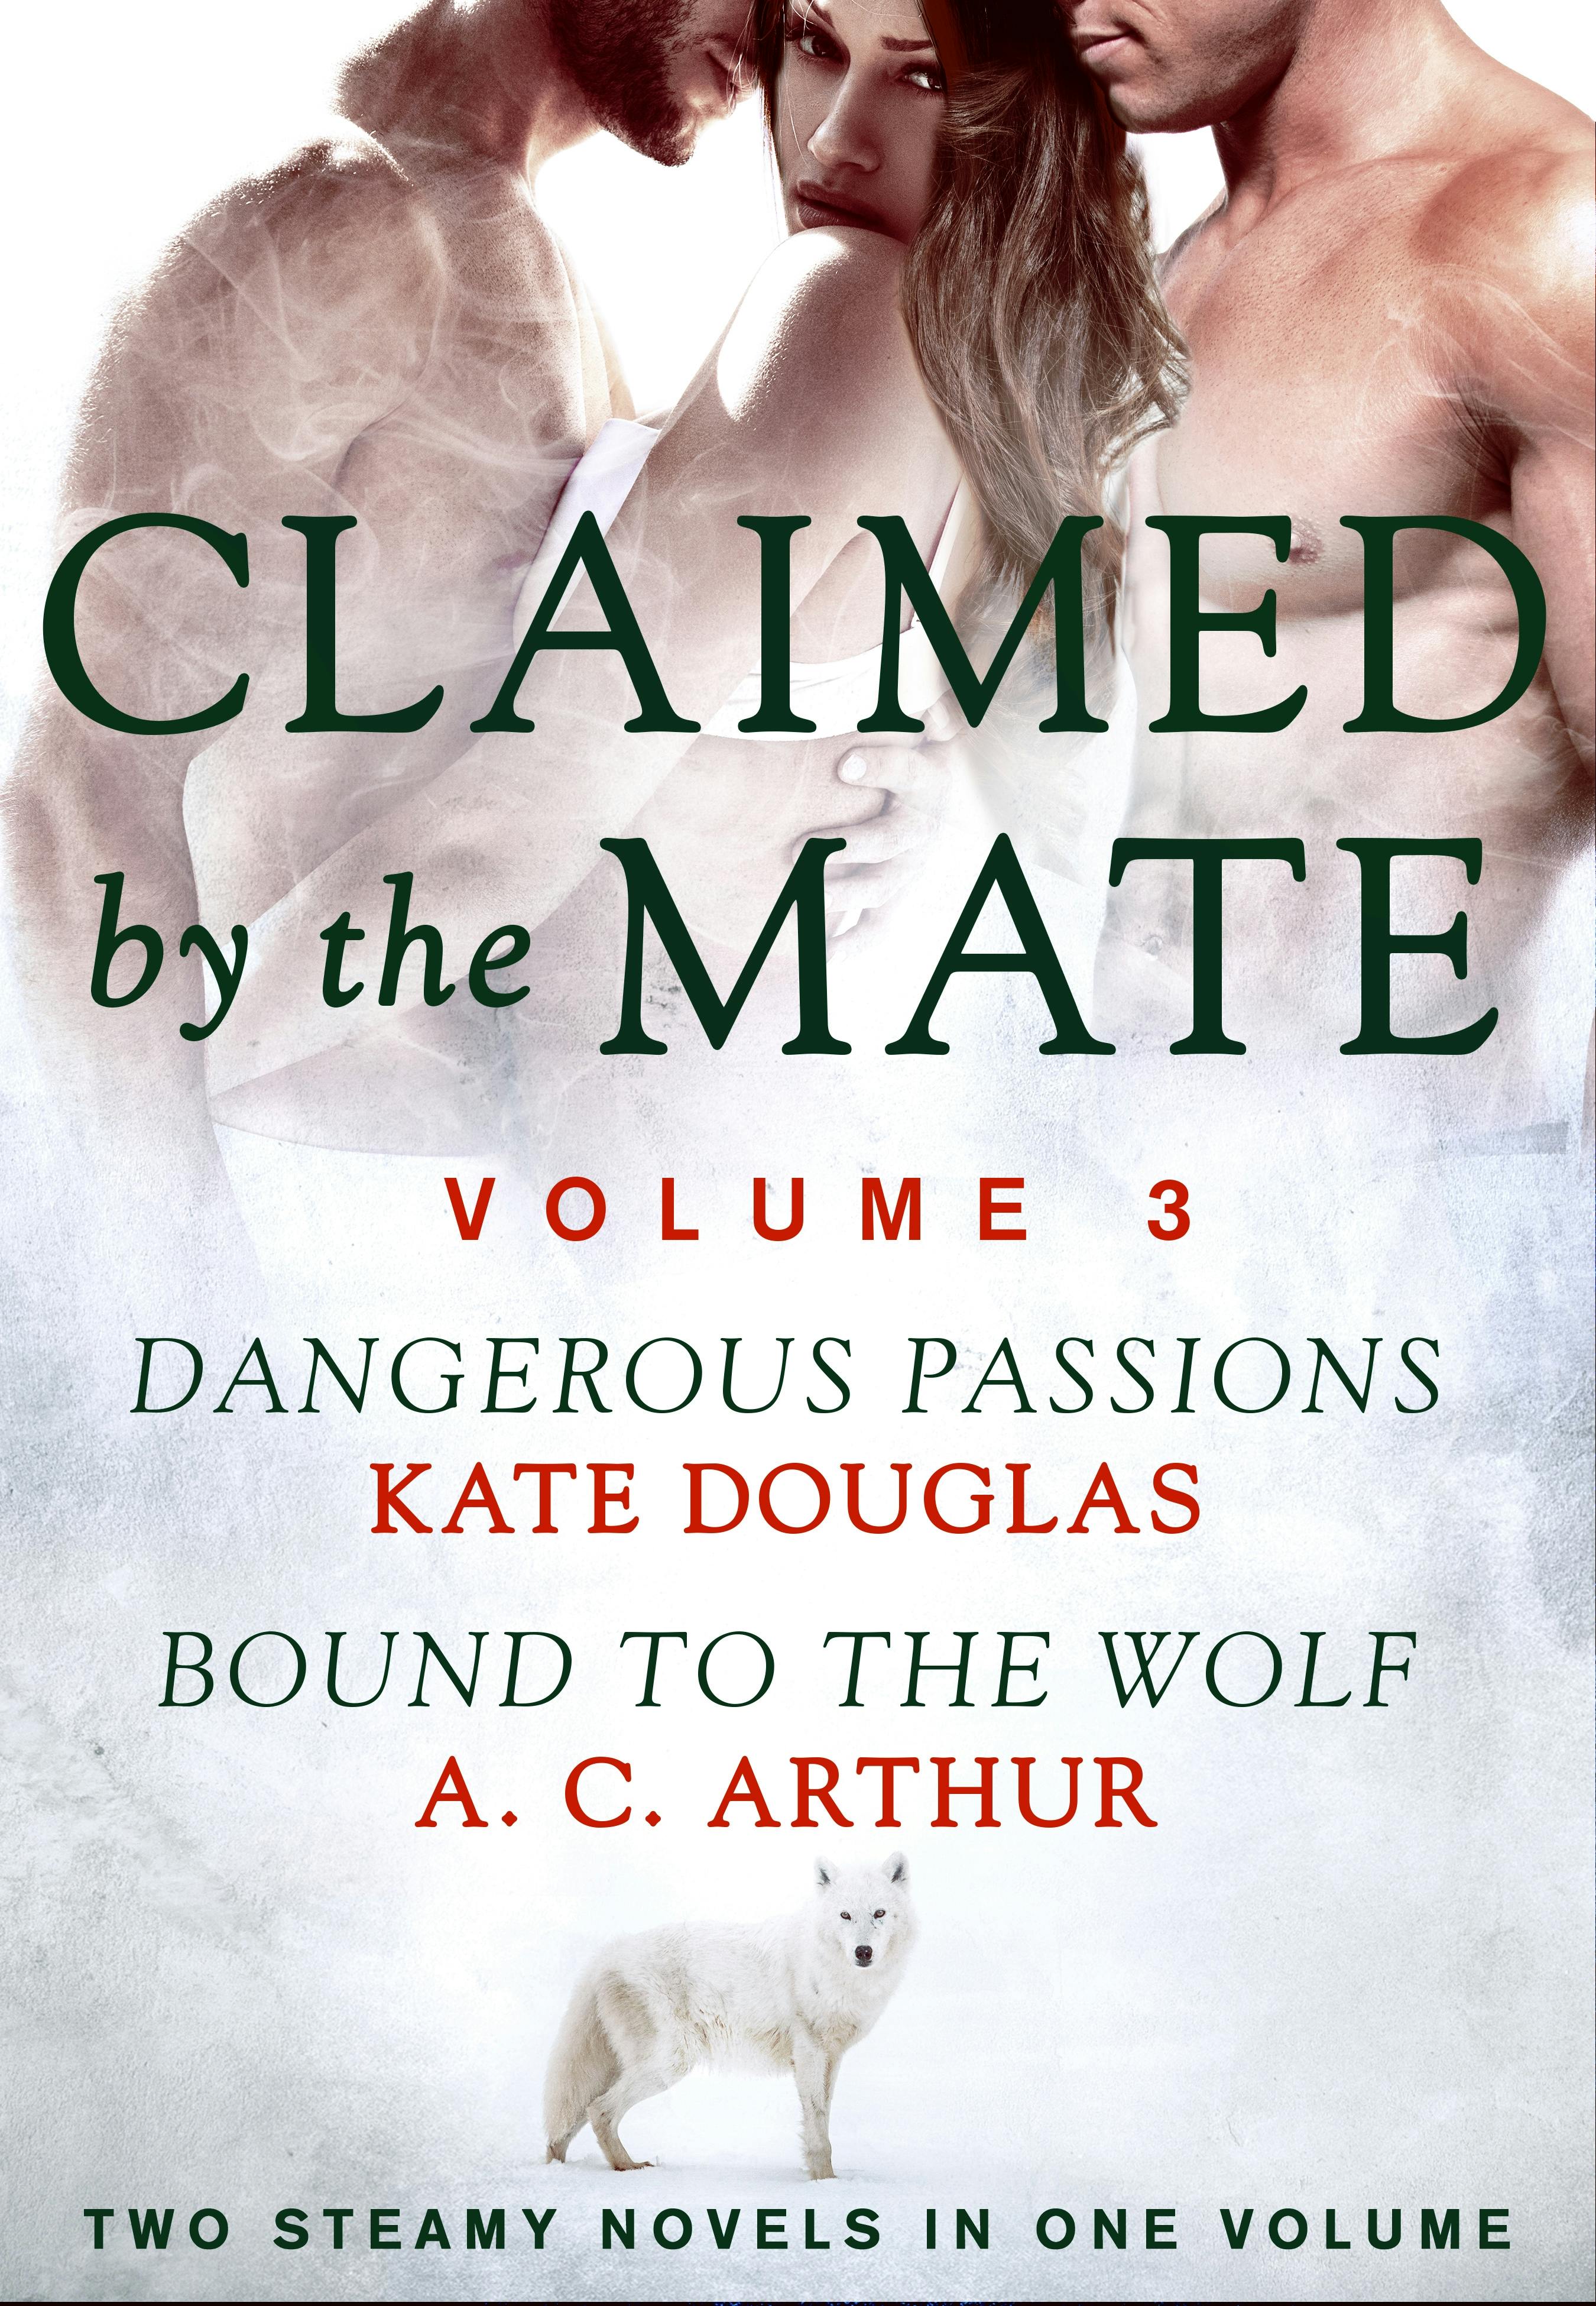 Image of Claimed by the Mate, Vol. 3